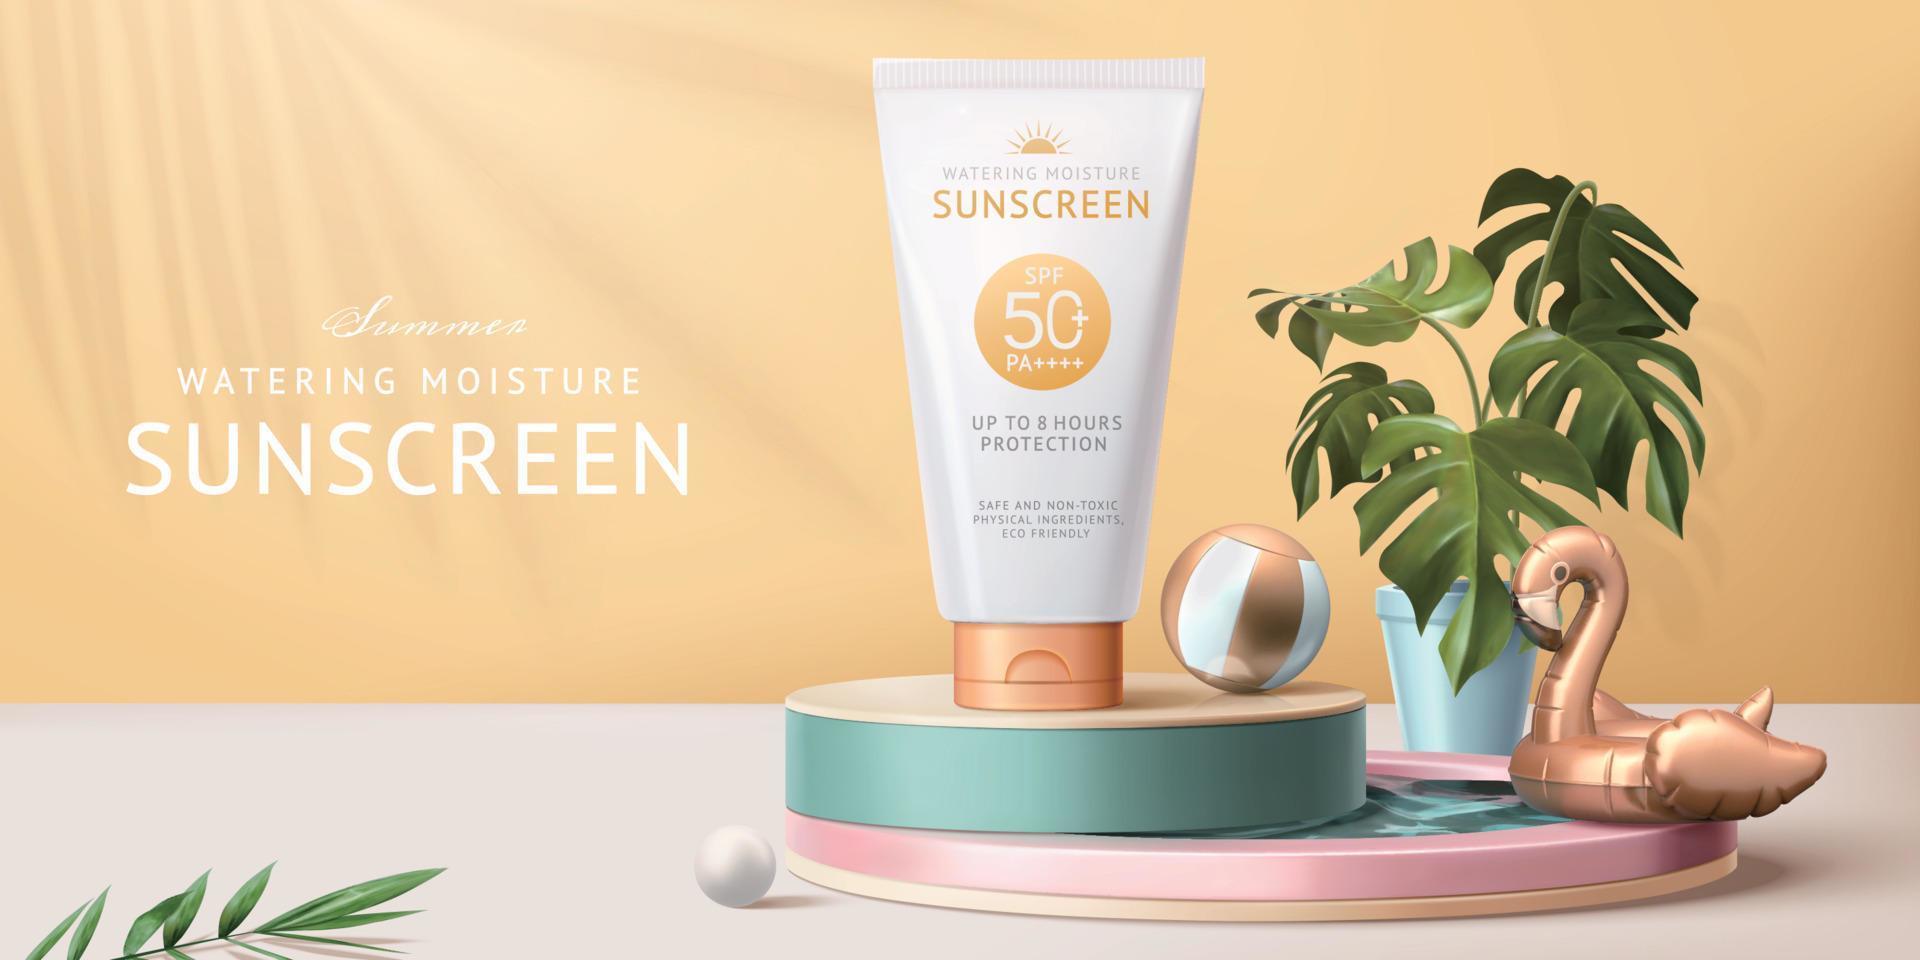 Sunscreen ad template, concept of skin care during summer season, designed with realistic tube mock-up displayed on swimming pool figurine, 3d illustration vector